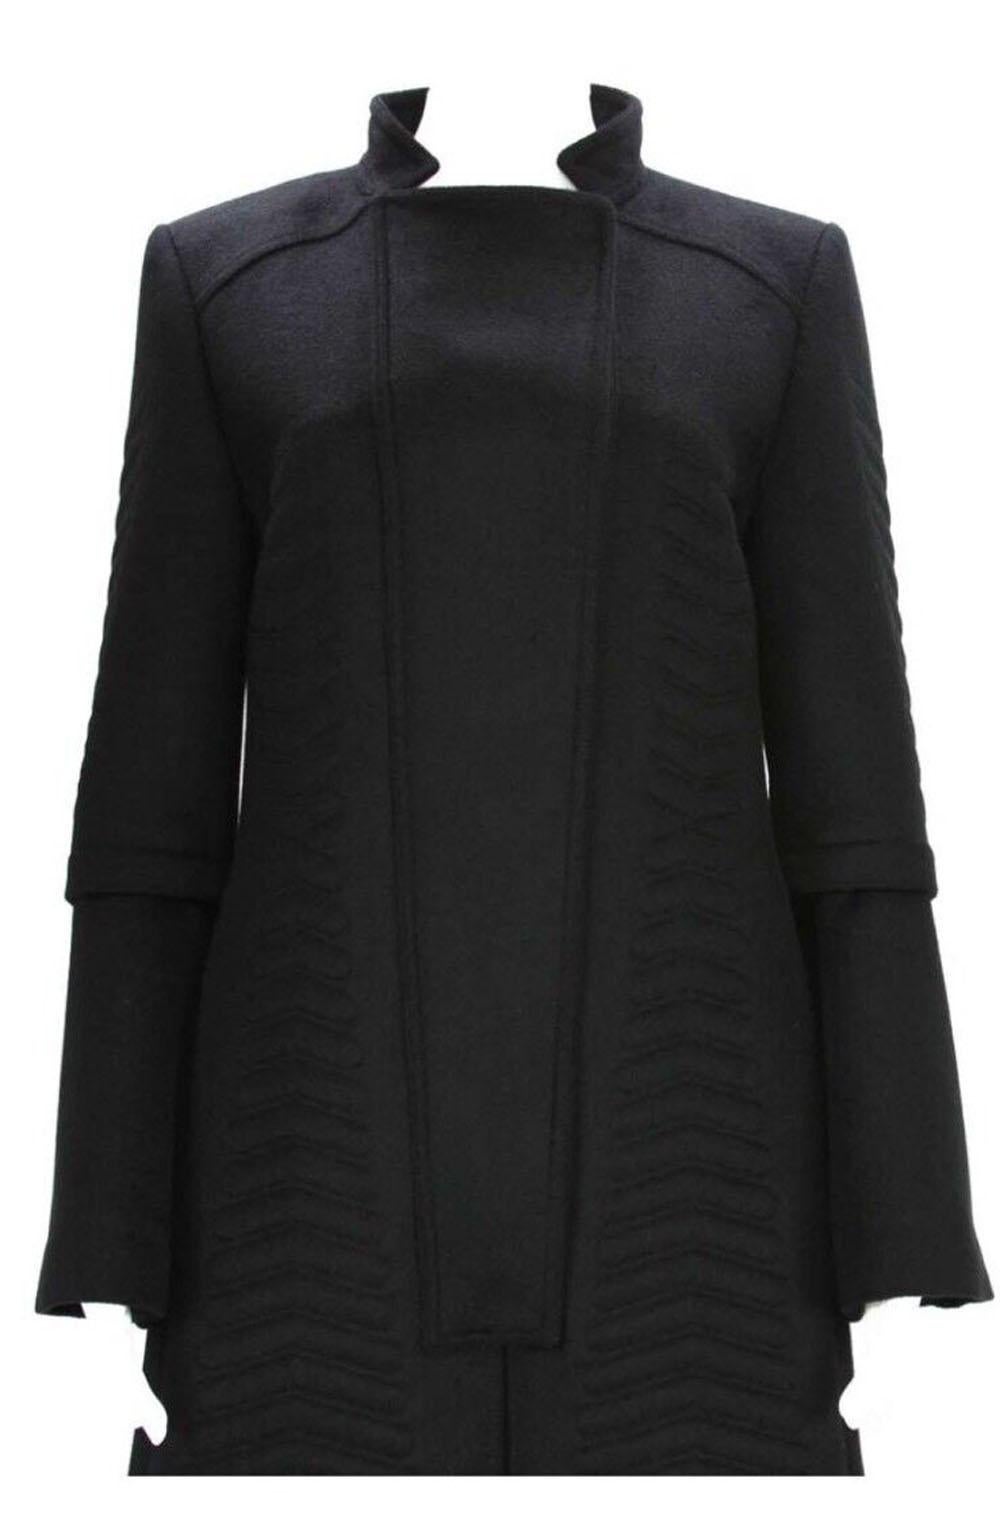 Tom Ford for Gucci F/W 2004 Black Angora Wool Chevron Pattern Coat with Belt  42 In Excellent Condition For Sale In Montgomery, TX